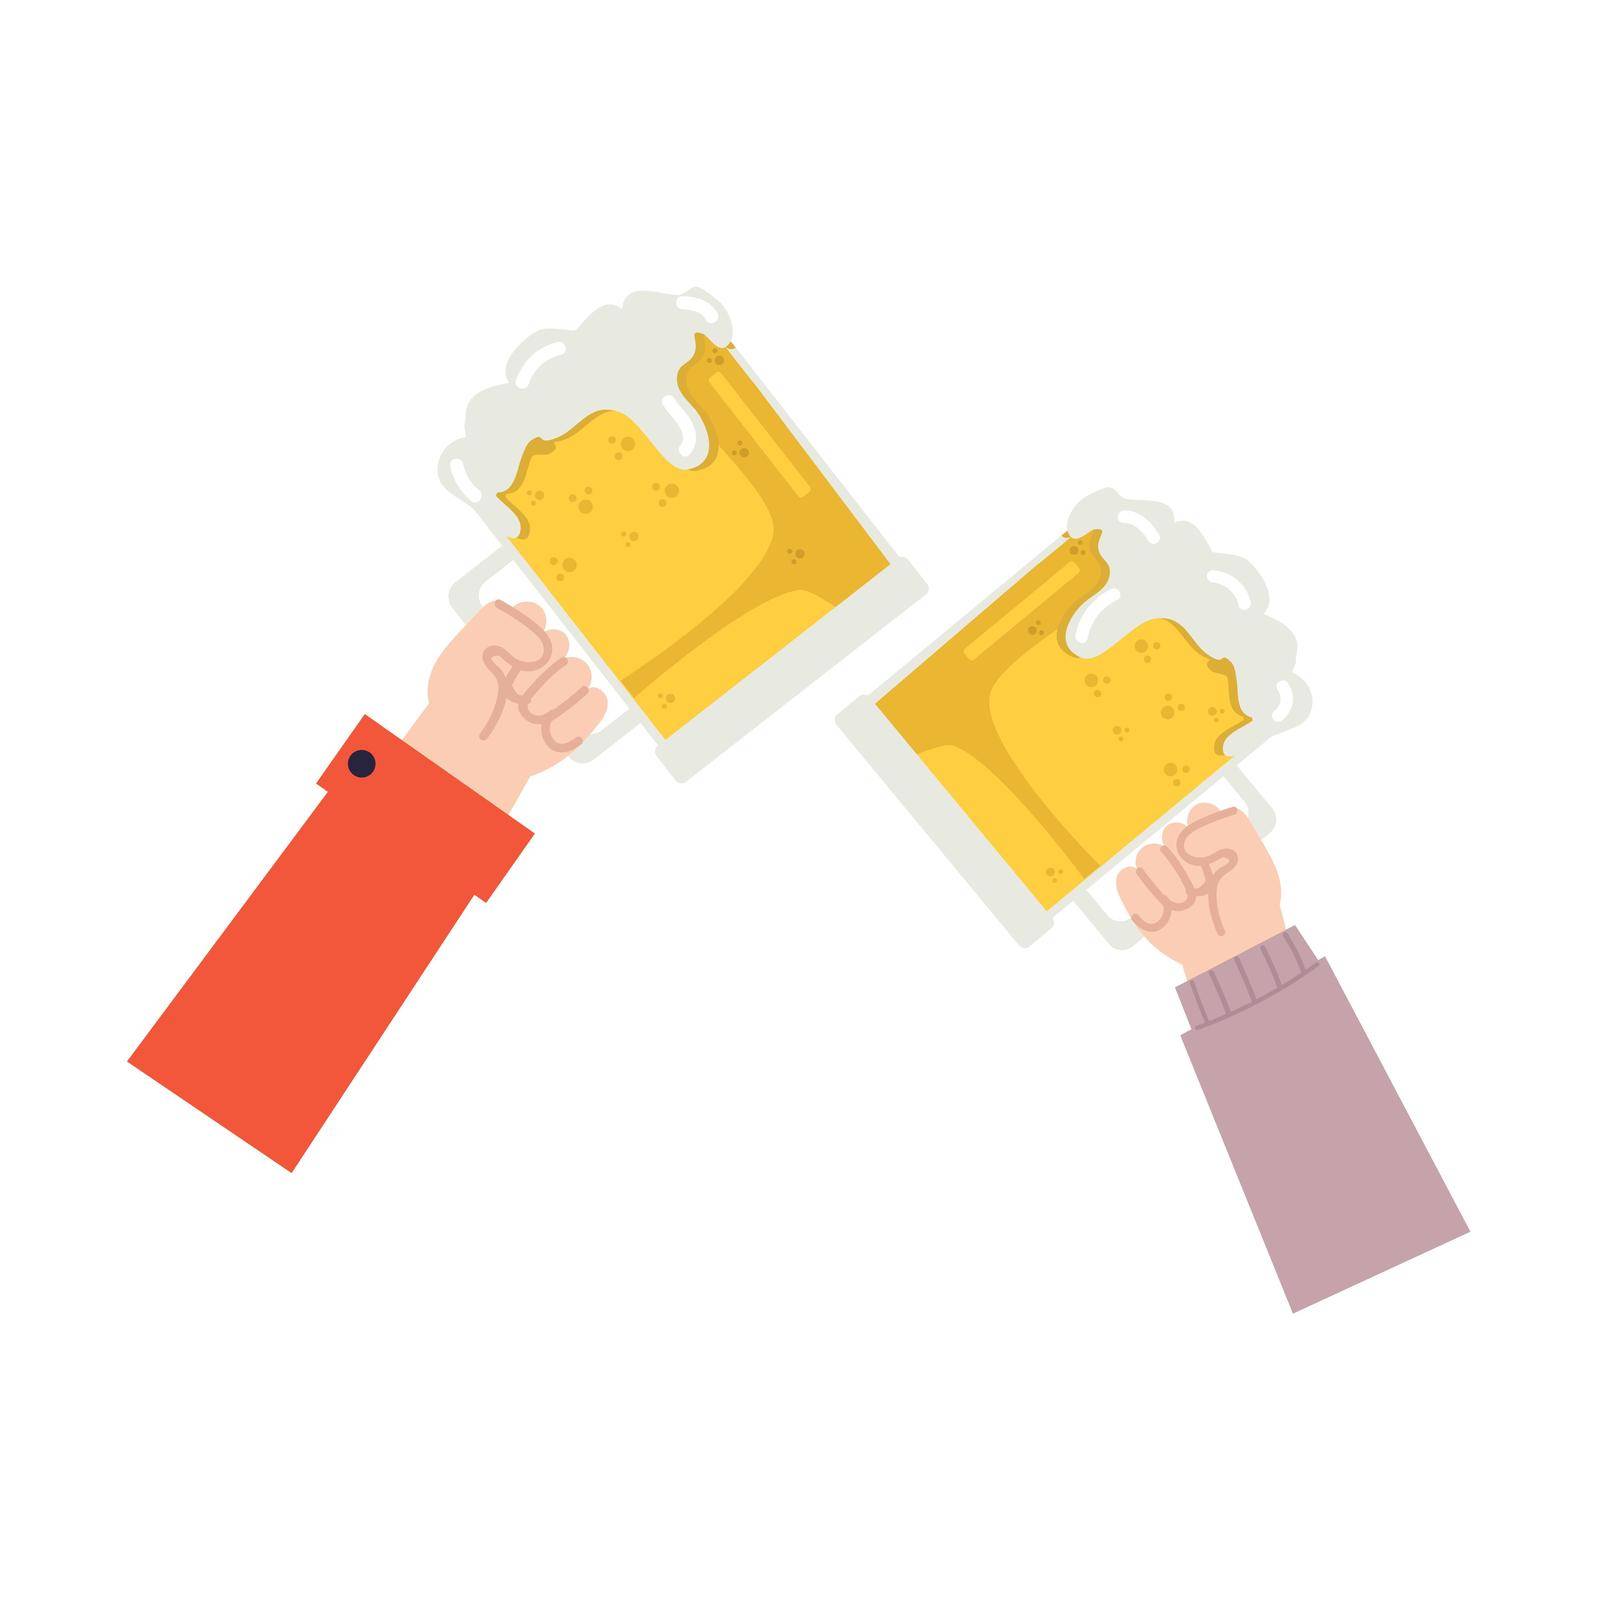 people  with alcohol drinks vector by focus_bell